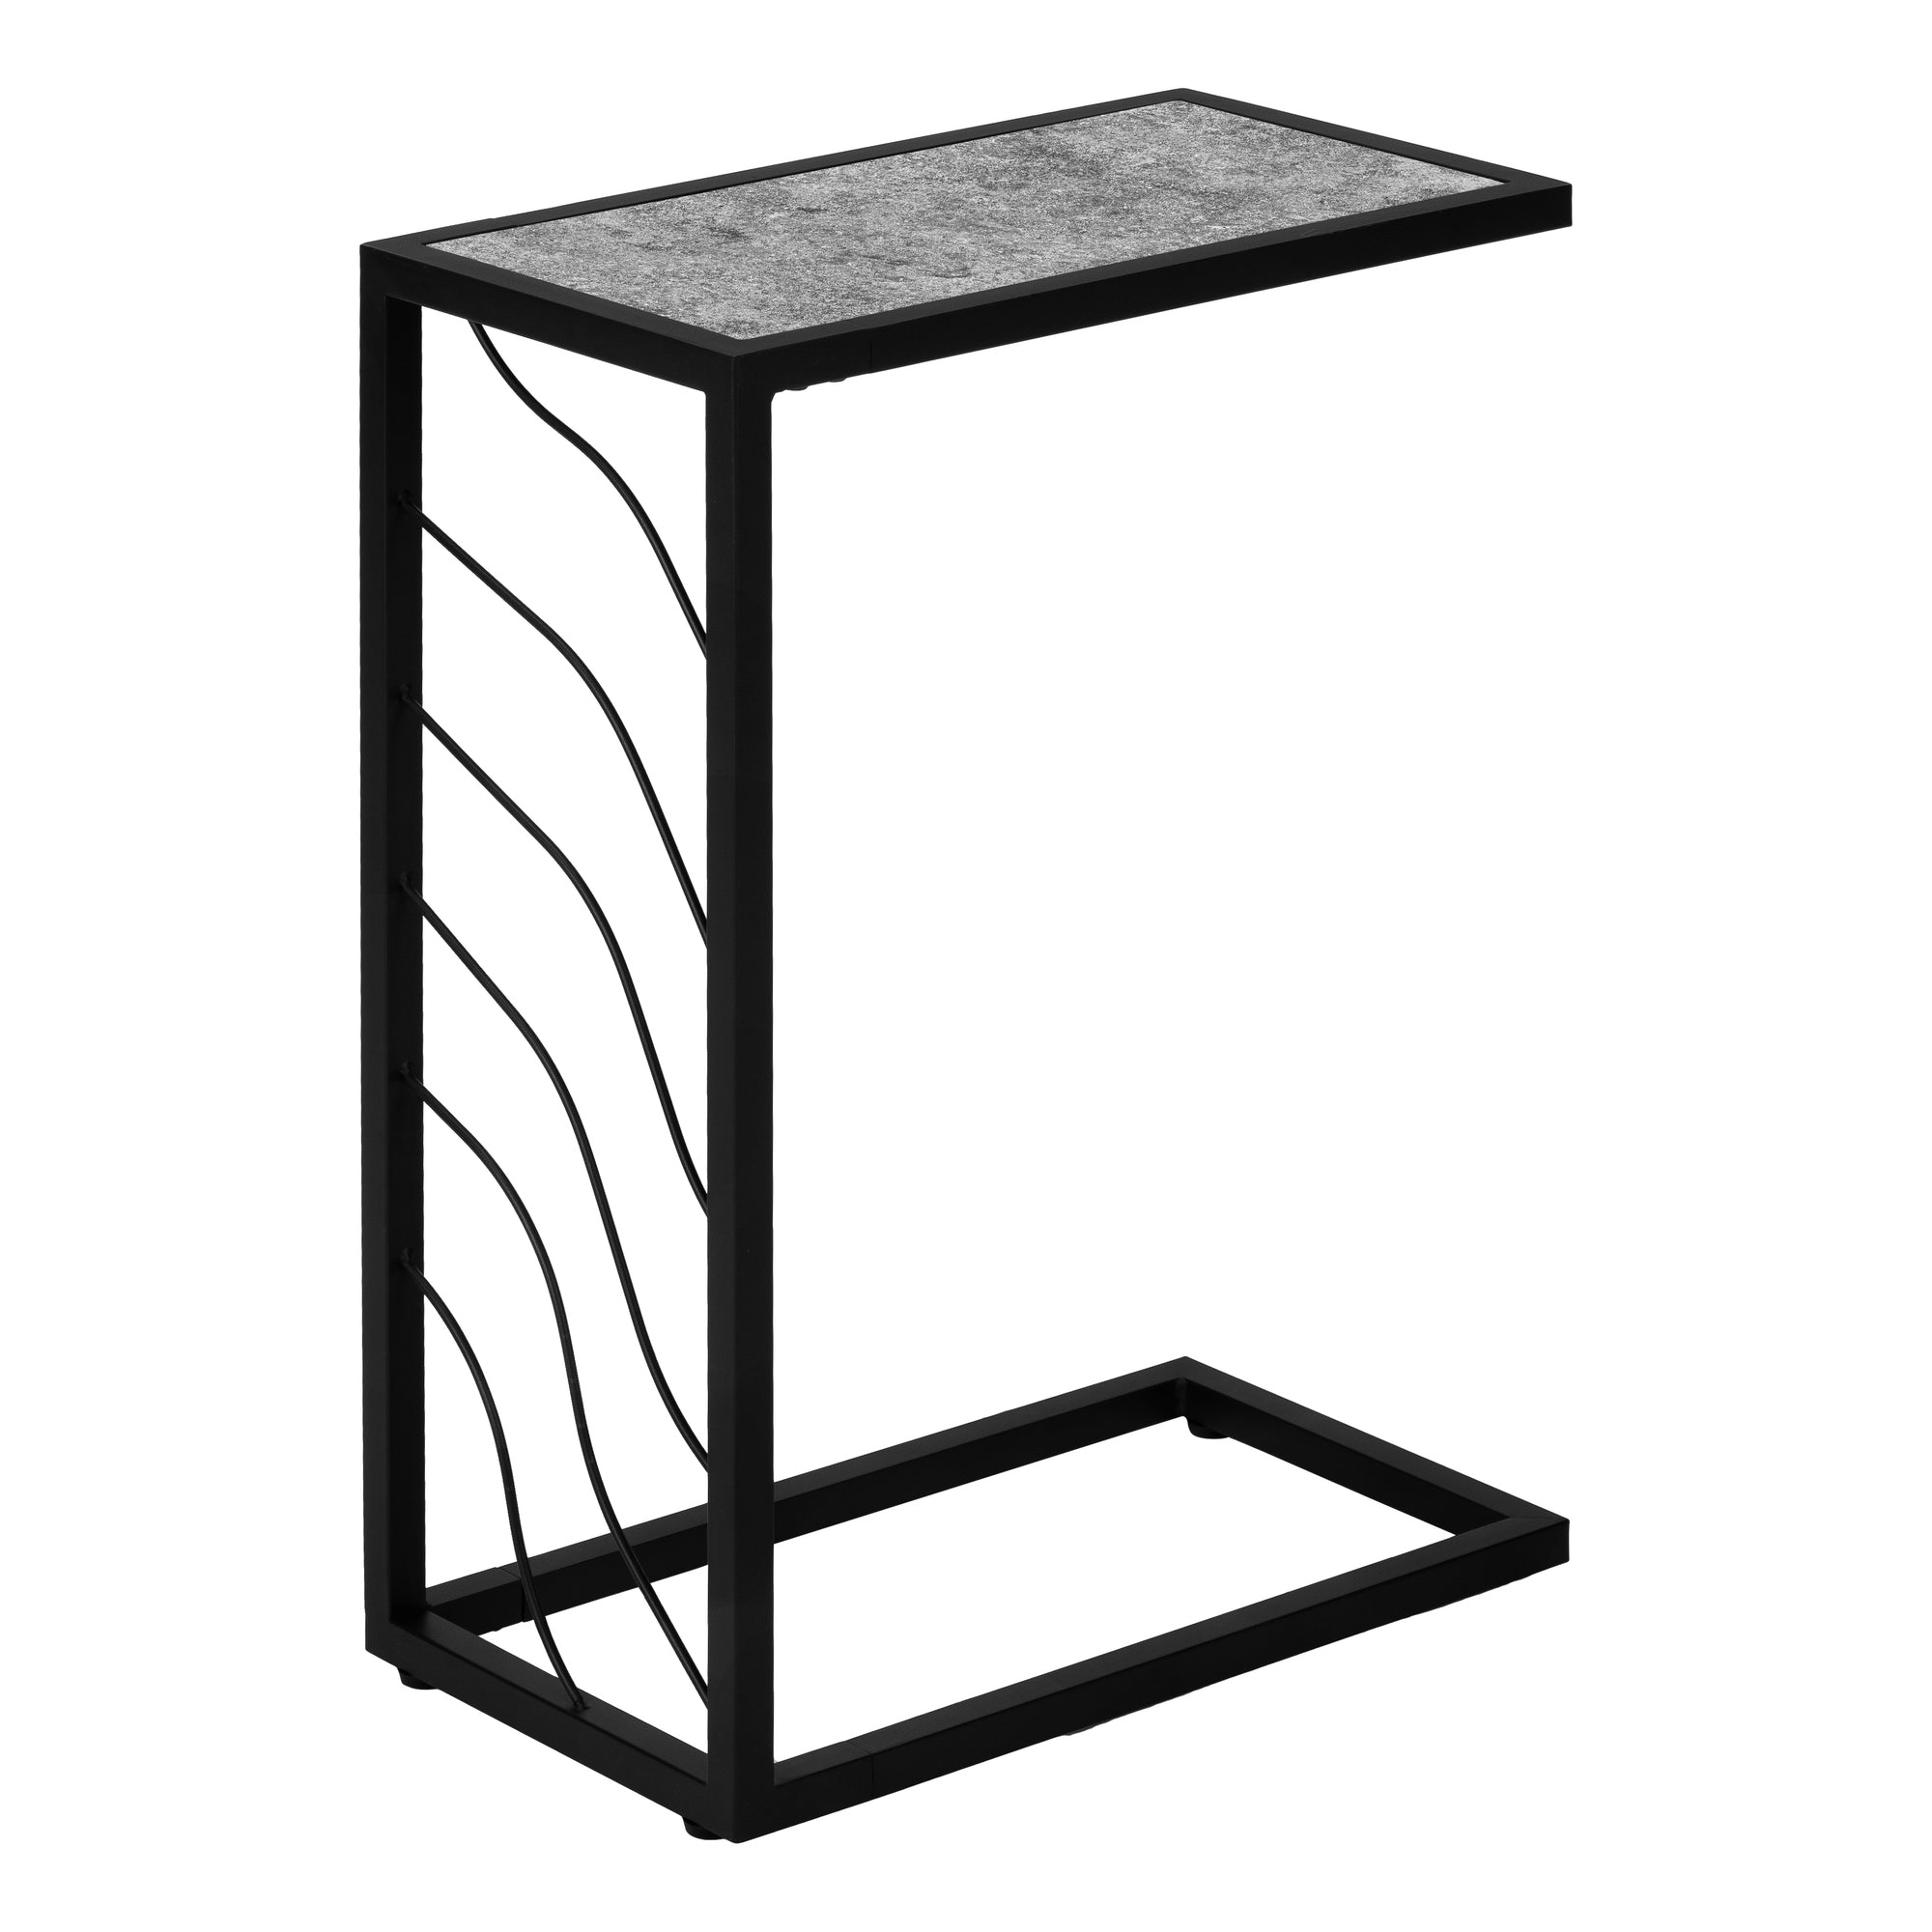 MN-213301    Accent Table, C-Shaped, End, Side, Snack, Living Room, Bedroom, Metal Frame, Laminate, Grey Stone Look, Black, Contemporary, Modern